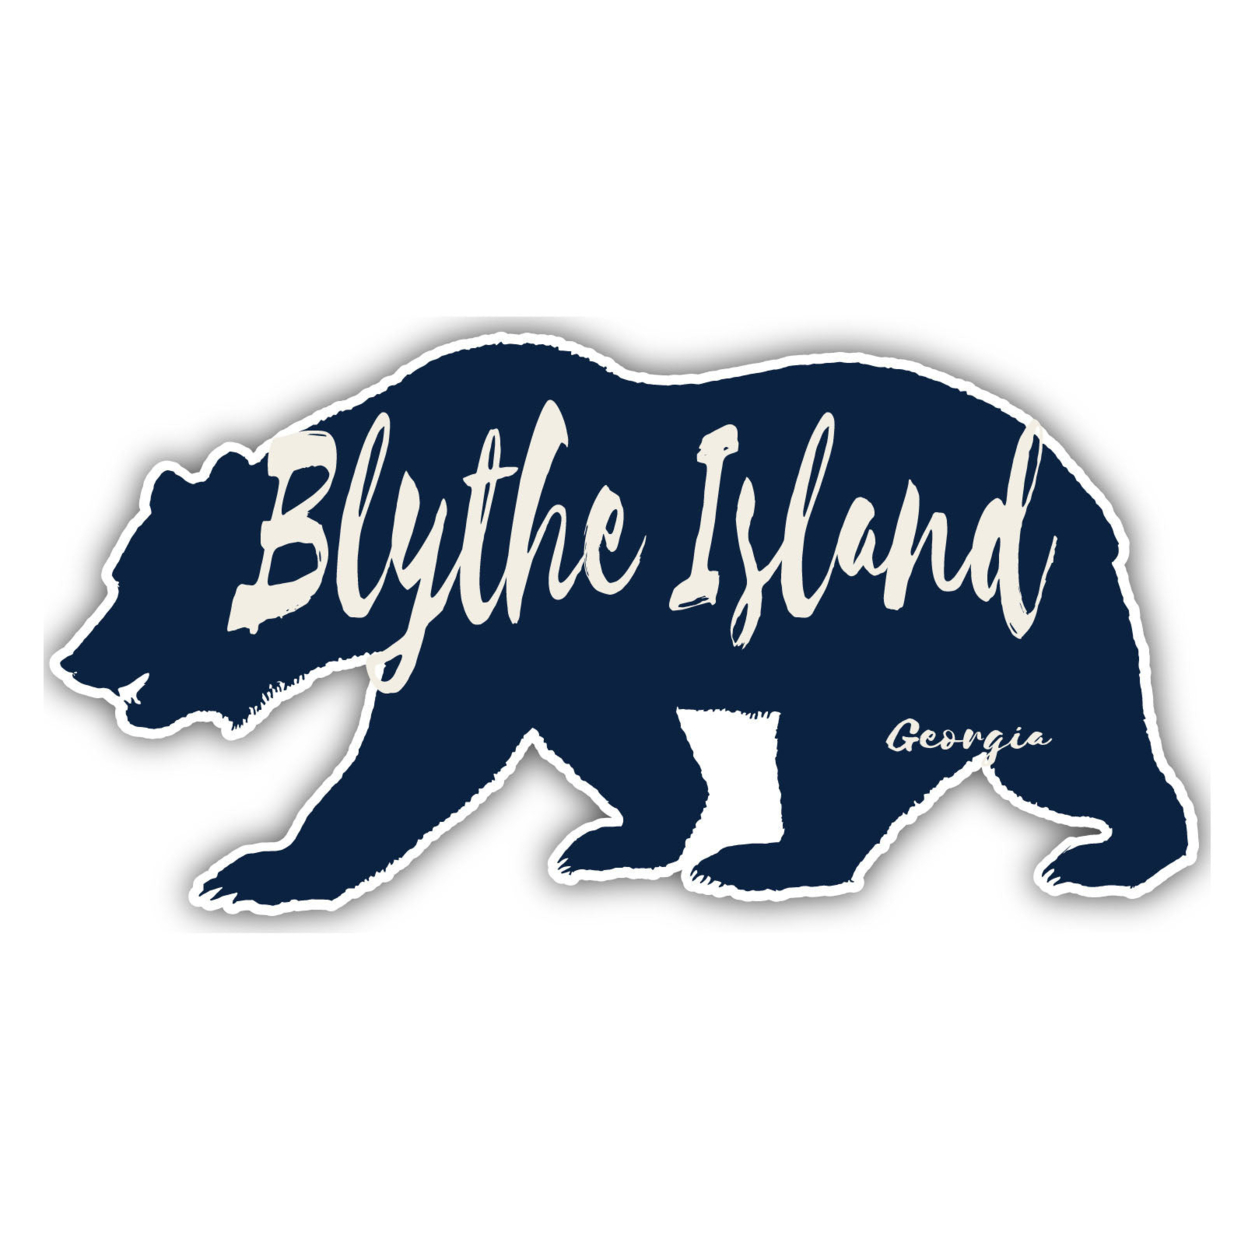 Blythe Island Georgia Souvenir Decorative Stickers (Choose Theme And Size) - 4-Pack, 4-Inch, Tent